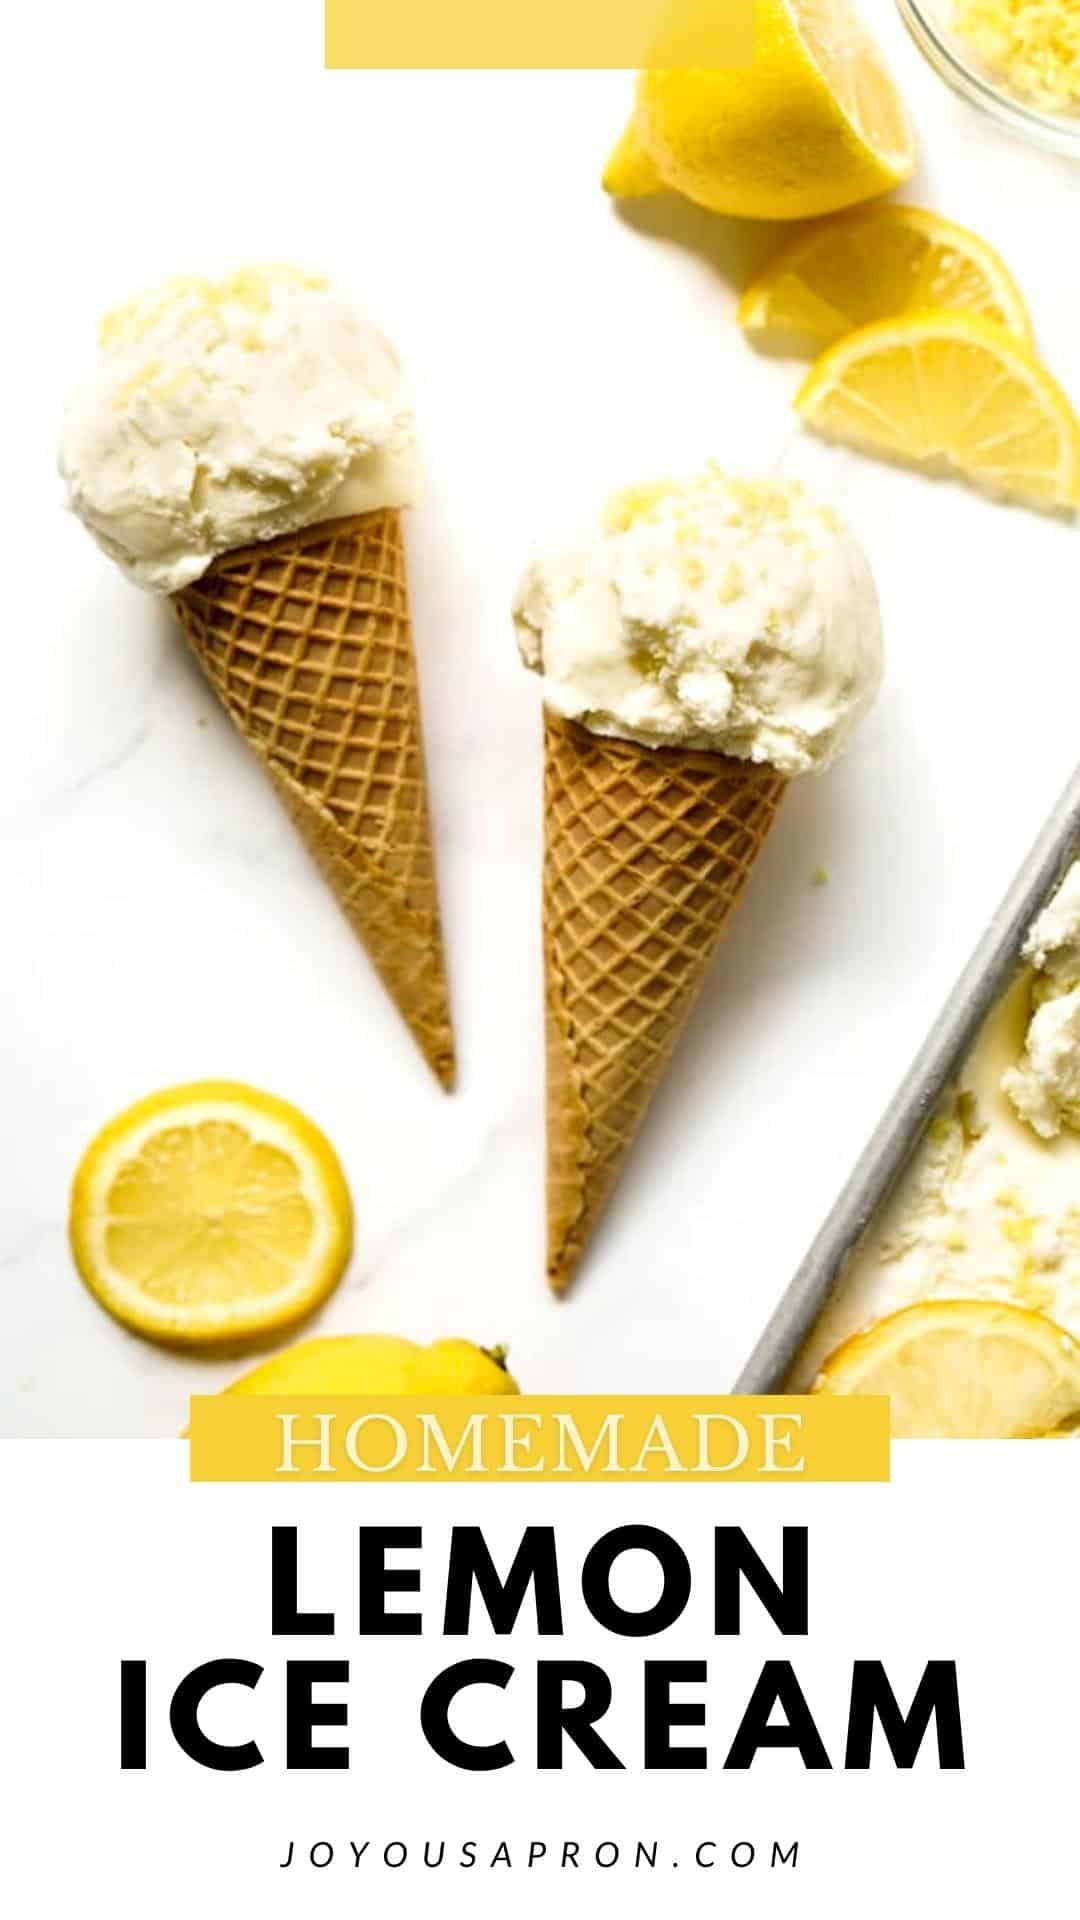 Lemon Ice Cream - homemade ice cream made with fresh lemons, infused with delicious lemon flavors, and is smooth, creamy and such a refreshing citrus dessert for the summer! Ice cream maker needed. via @joyousapron